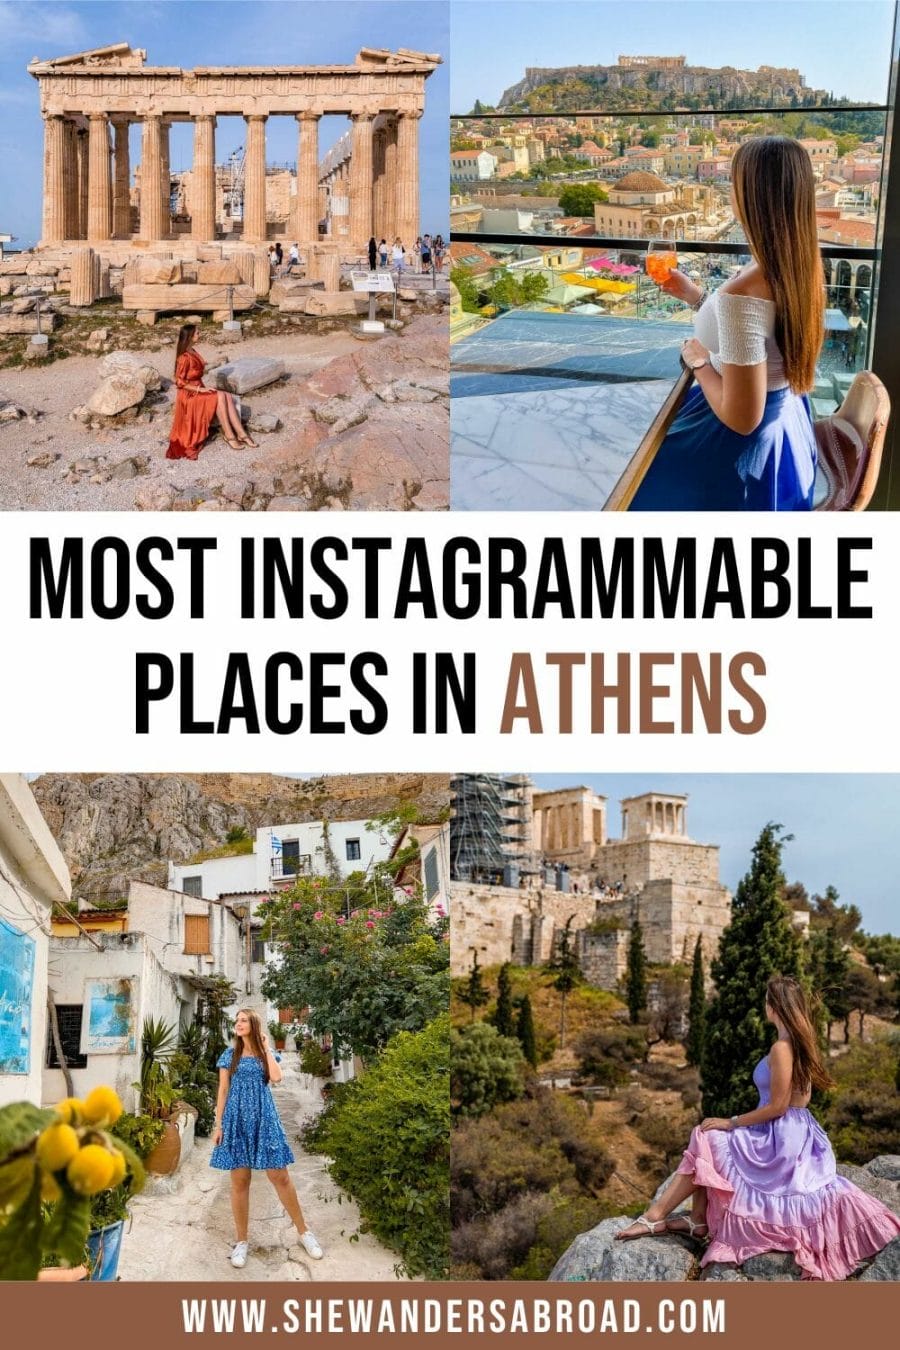 14 Epic Athens Instagram Spots You Can’t Miss